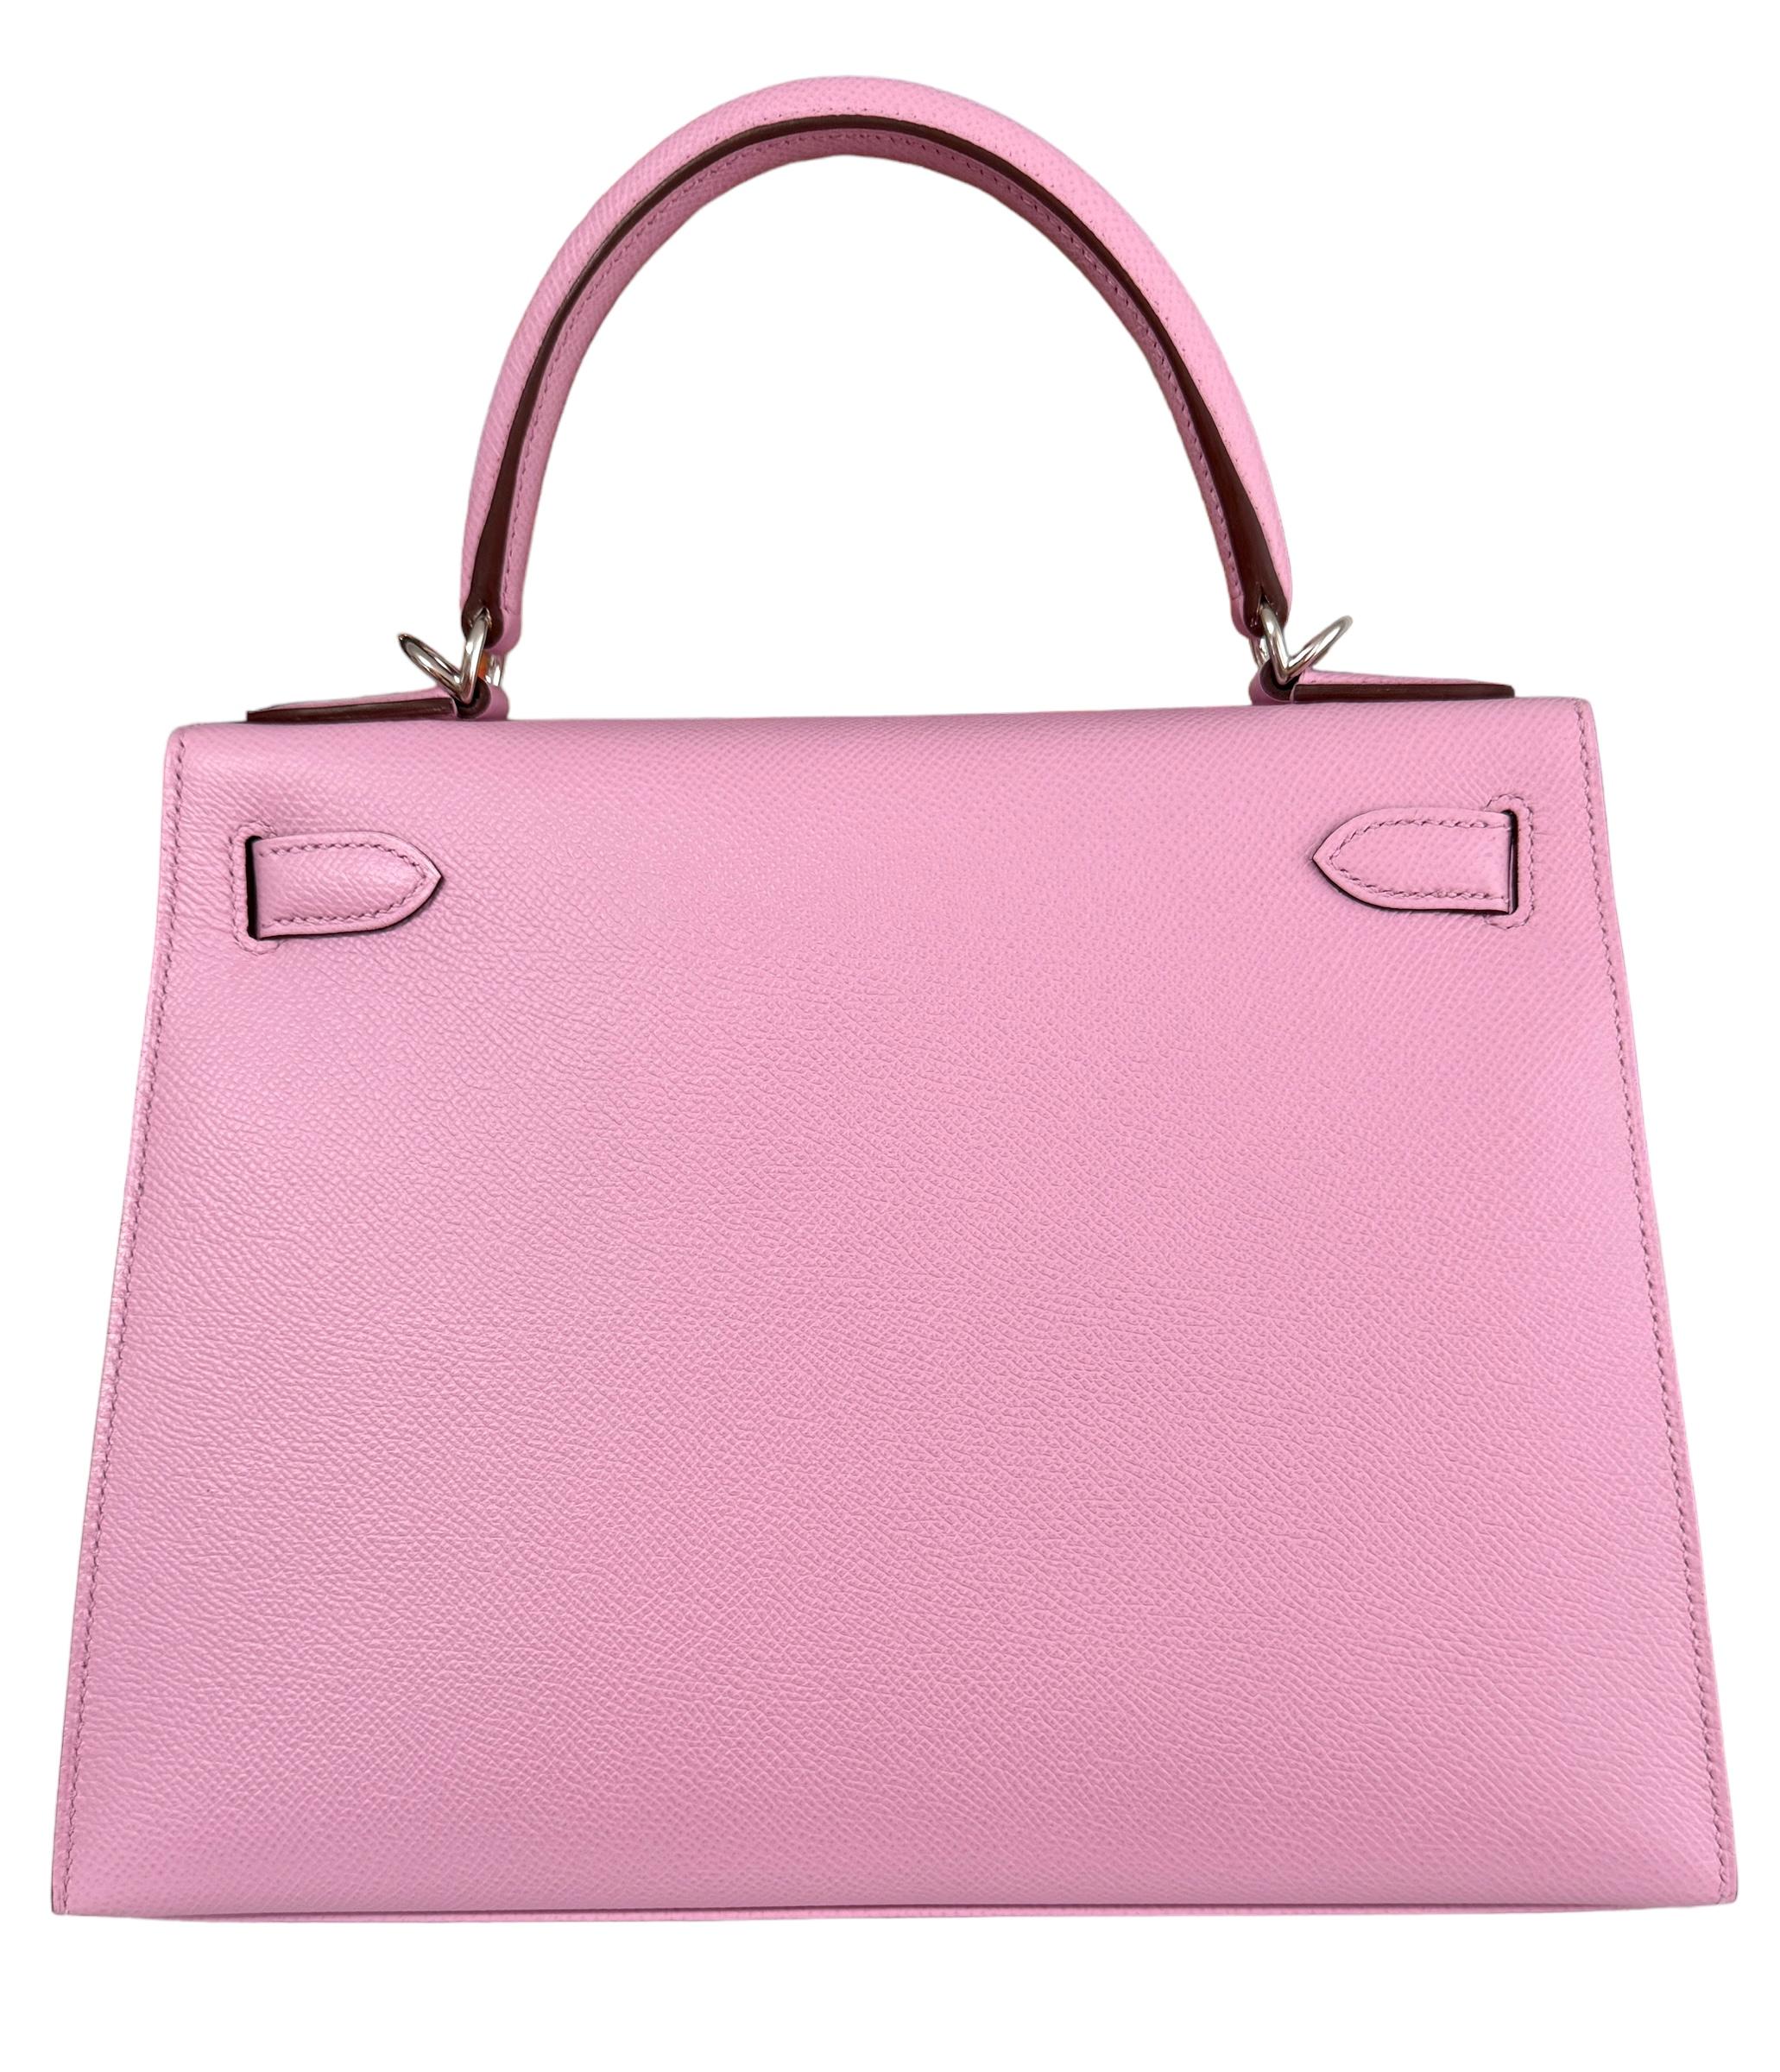 Hermes Kelly 28 Sellier Mauve Sylvester Pink Epsom Palladium Hardware 2022 In New Condition For Sale In Miami, FL